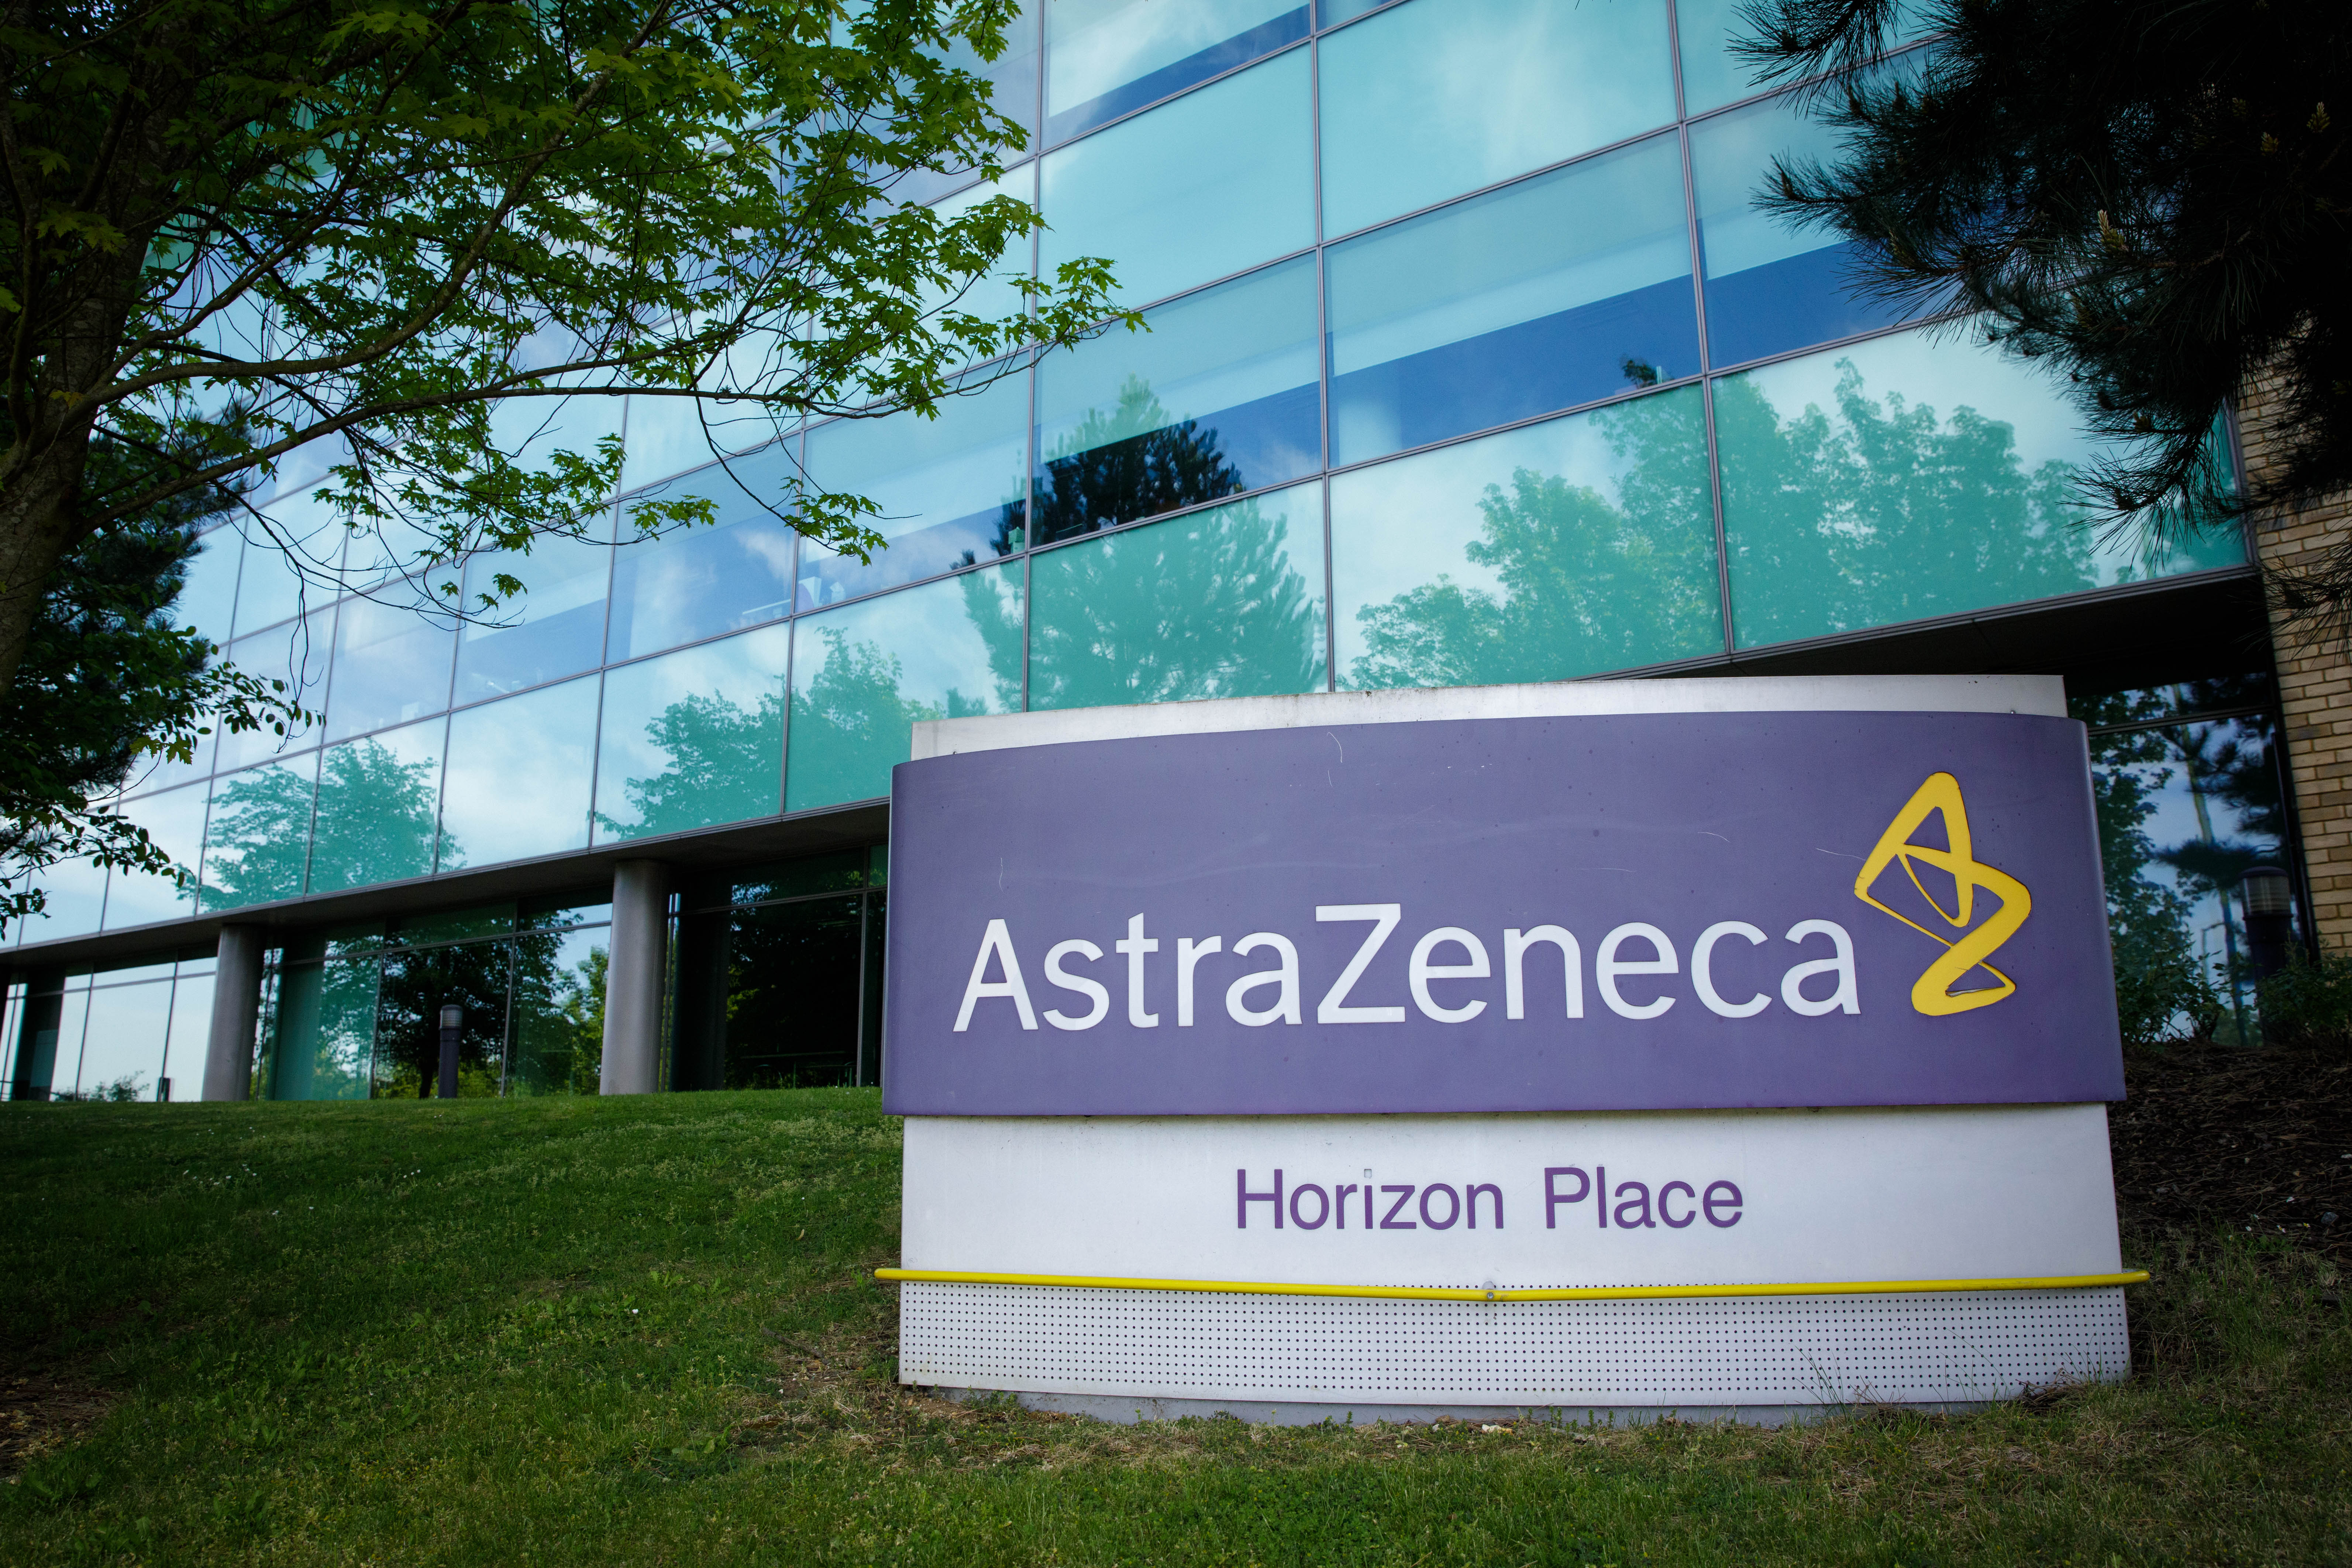 The AstraZeneca building in Luton, England, is pictured on May 18.